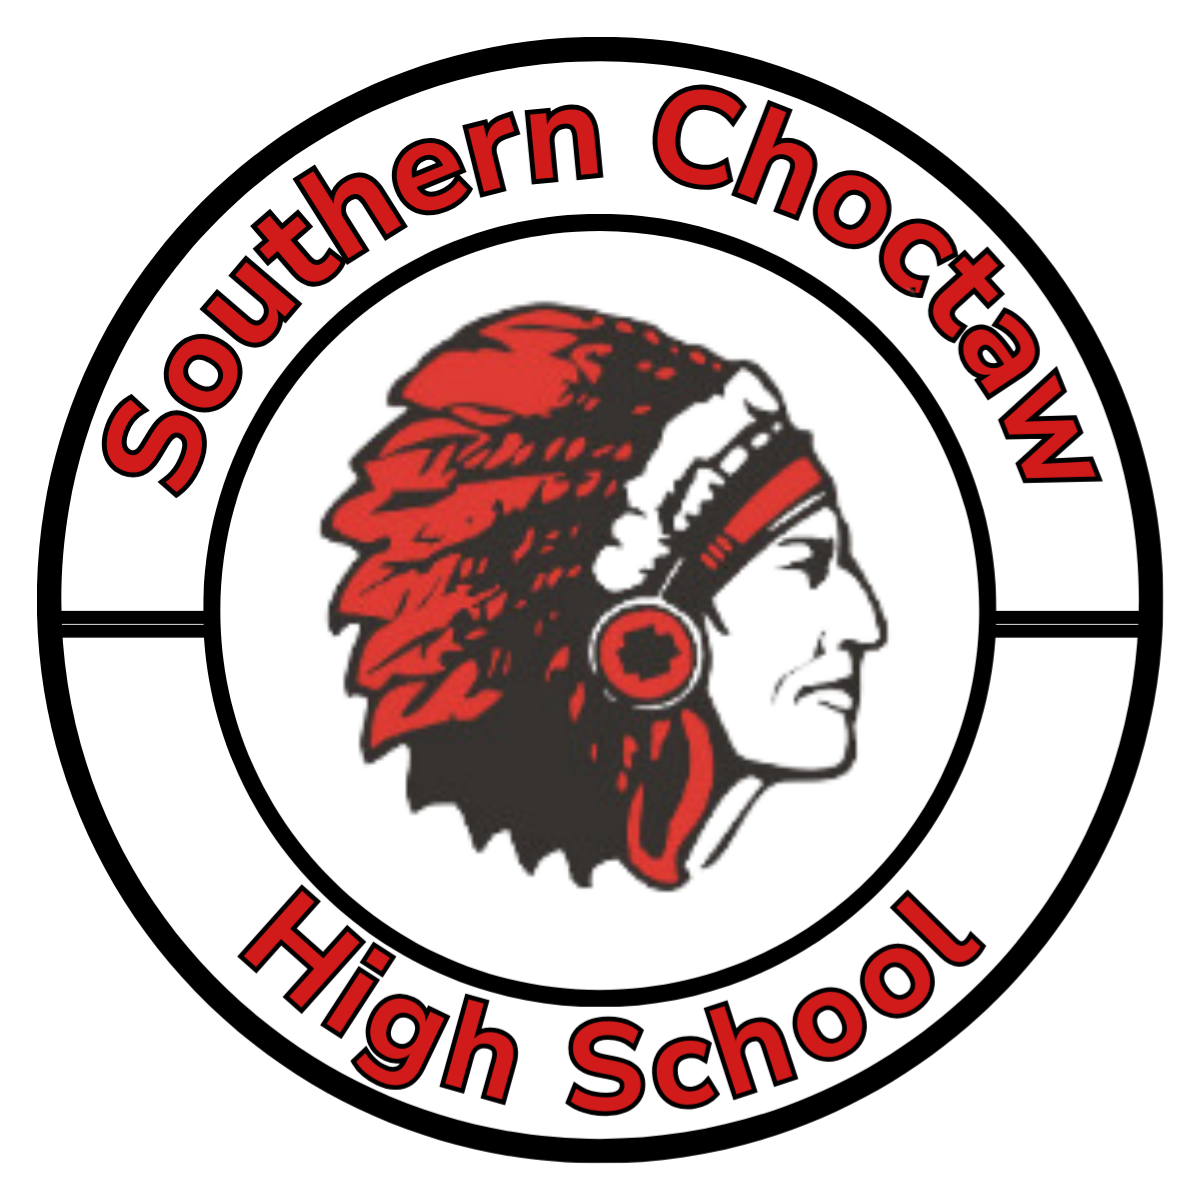 the logo for southern choctaw high school shows a native american chief .